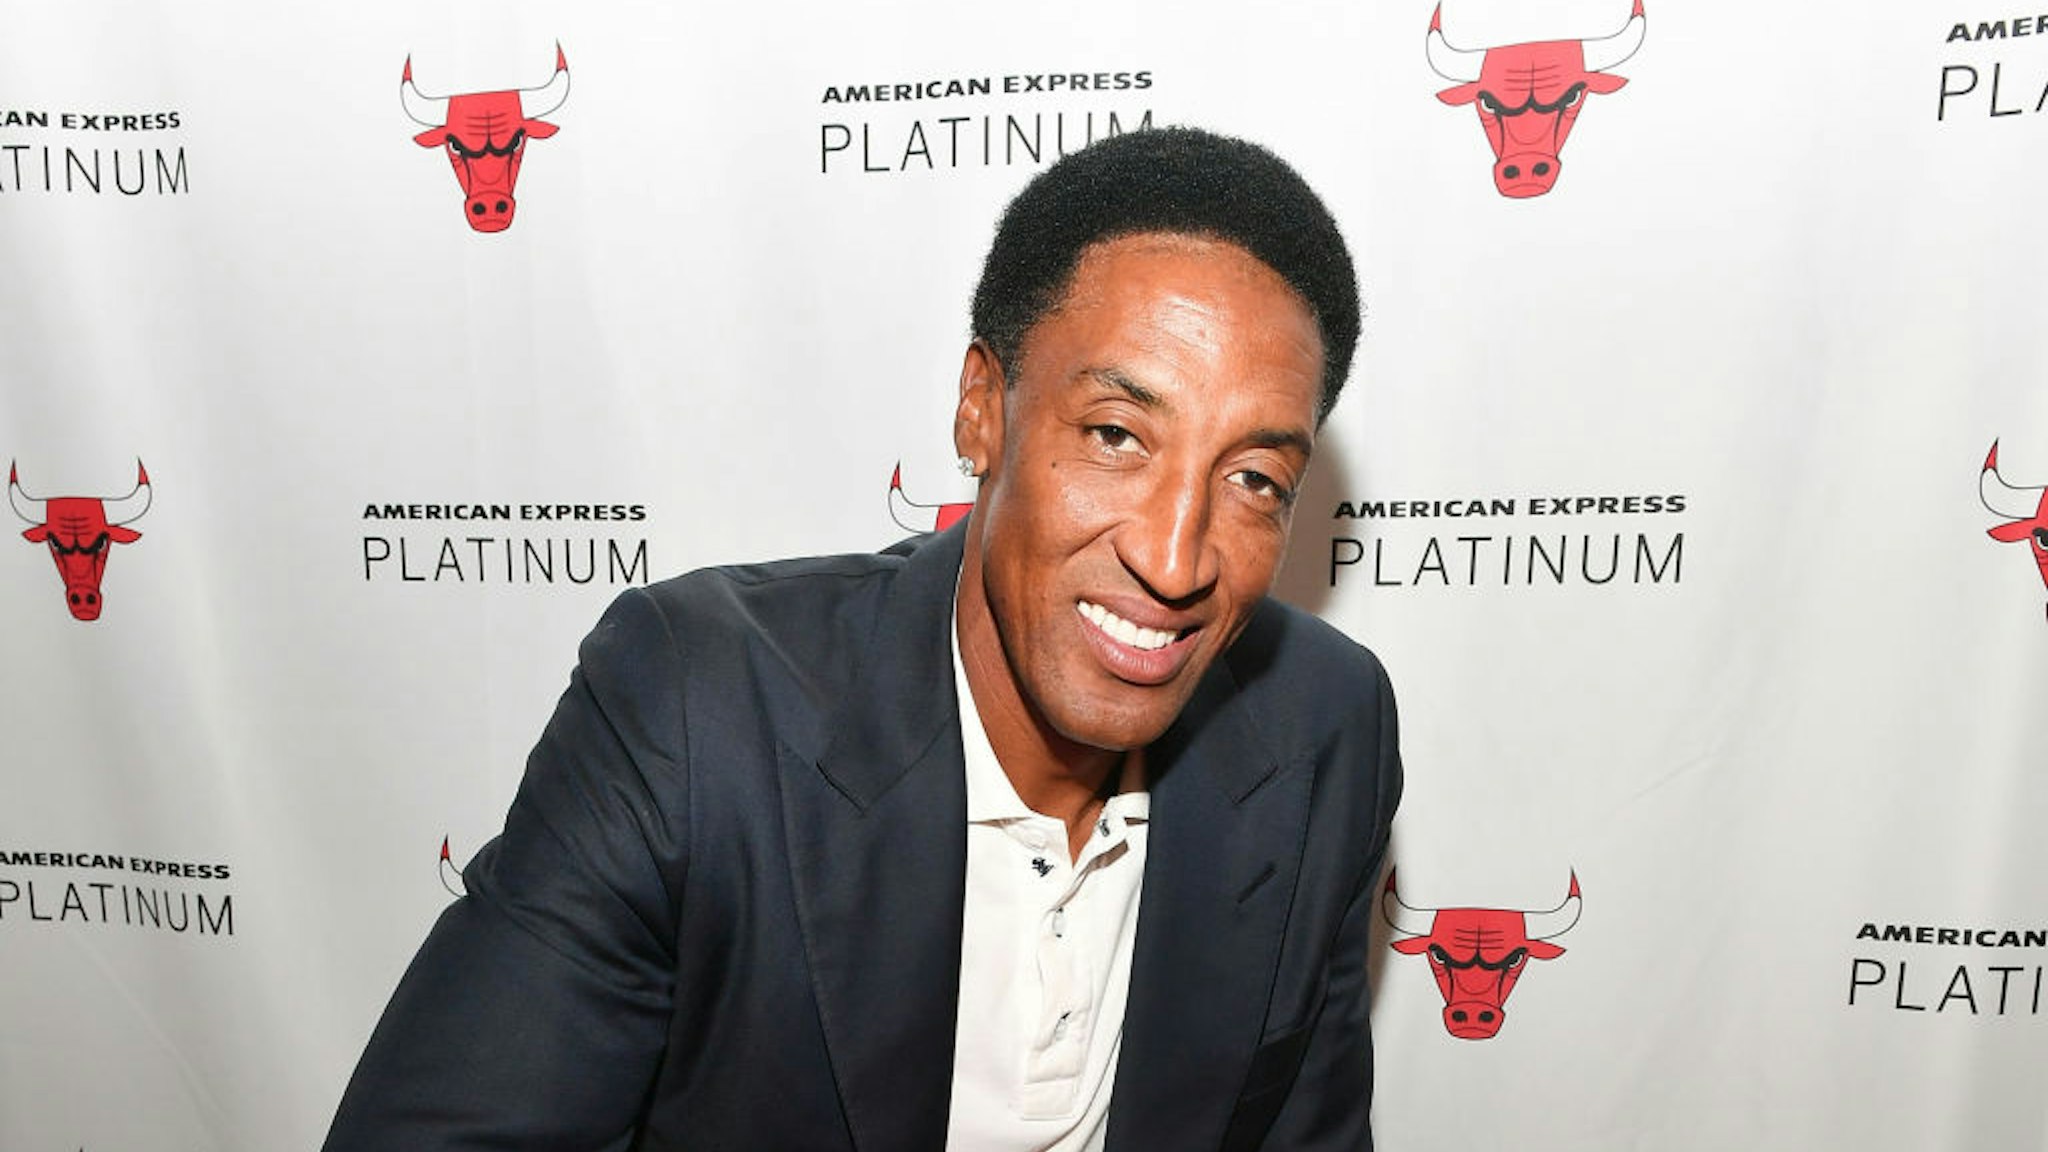 CHICAGO, IL - APRIL 01: Scottie Pippen meets fans at American Express "Paints The Town Platinum" At The Chicago Bulls Game At The United Center In Chicago on April 1, 2017 in Chicago, Illinois. (Photo by Daniel Boczarski/Getty Images for American Express)